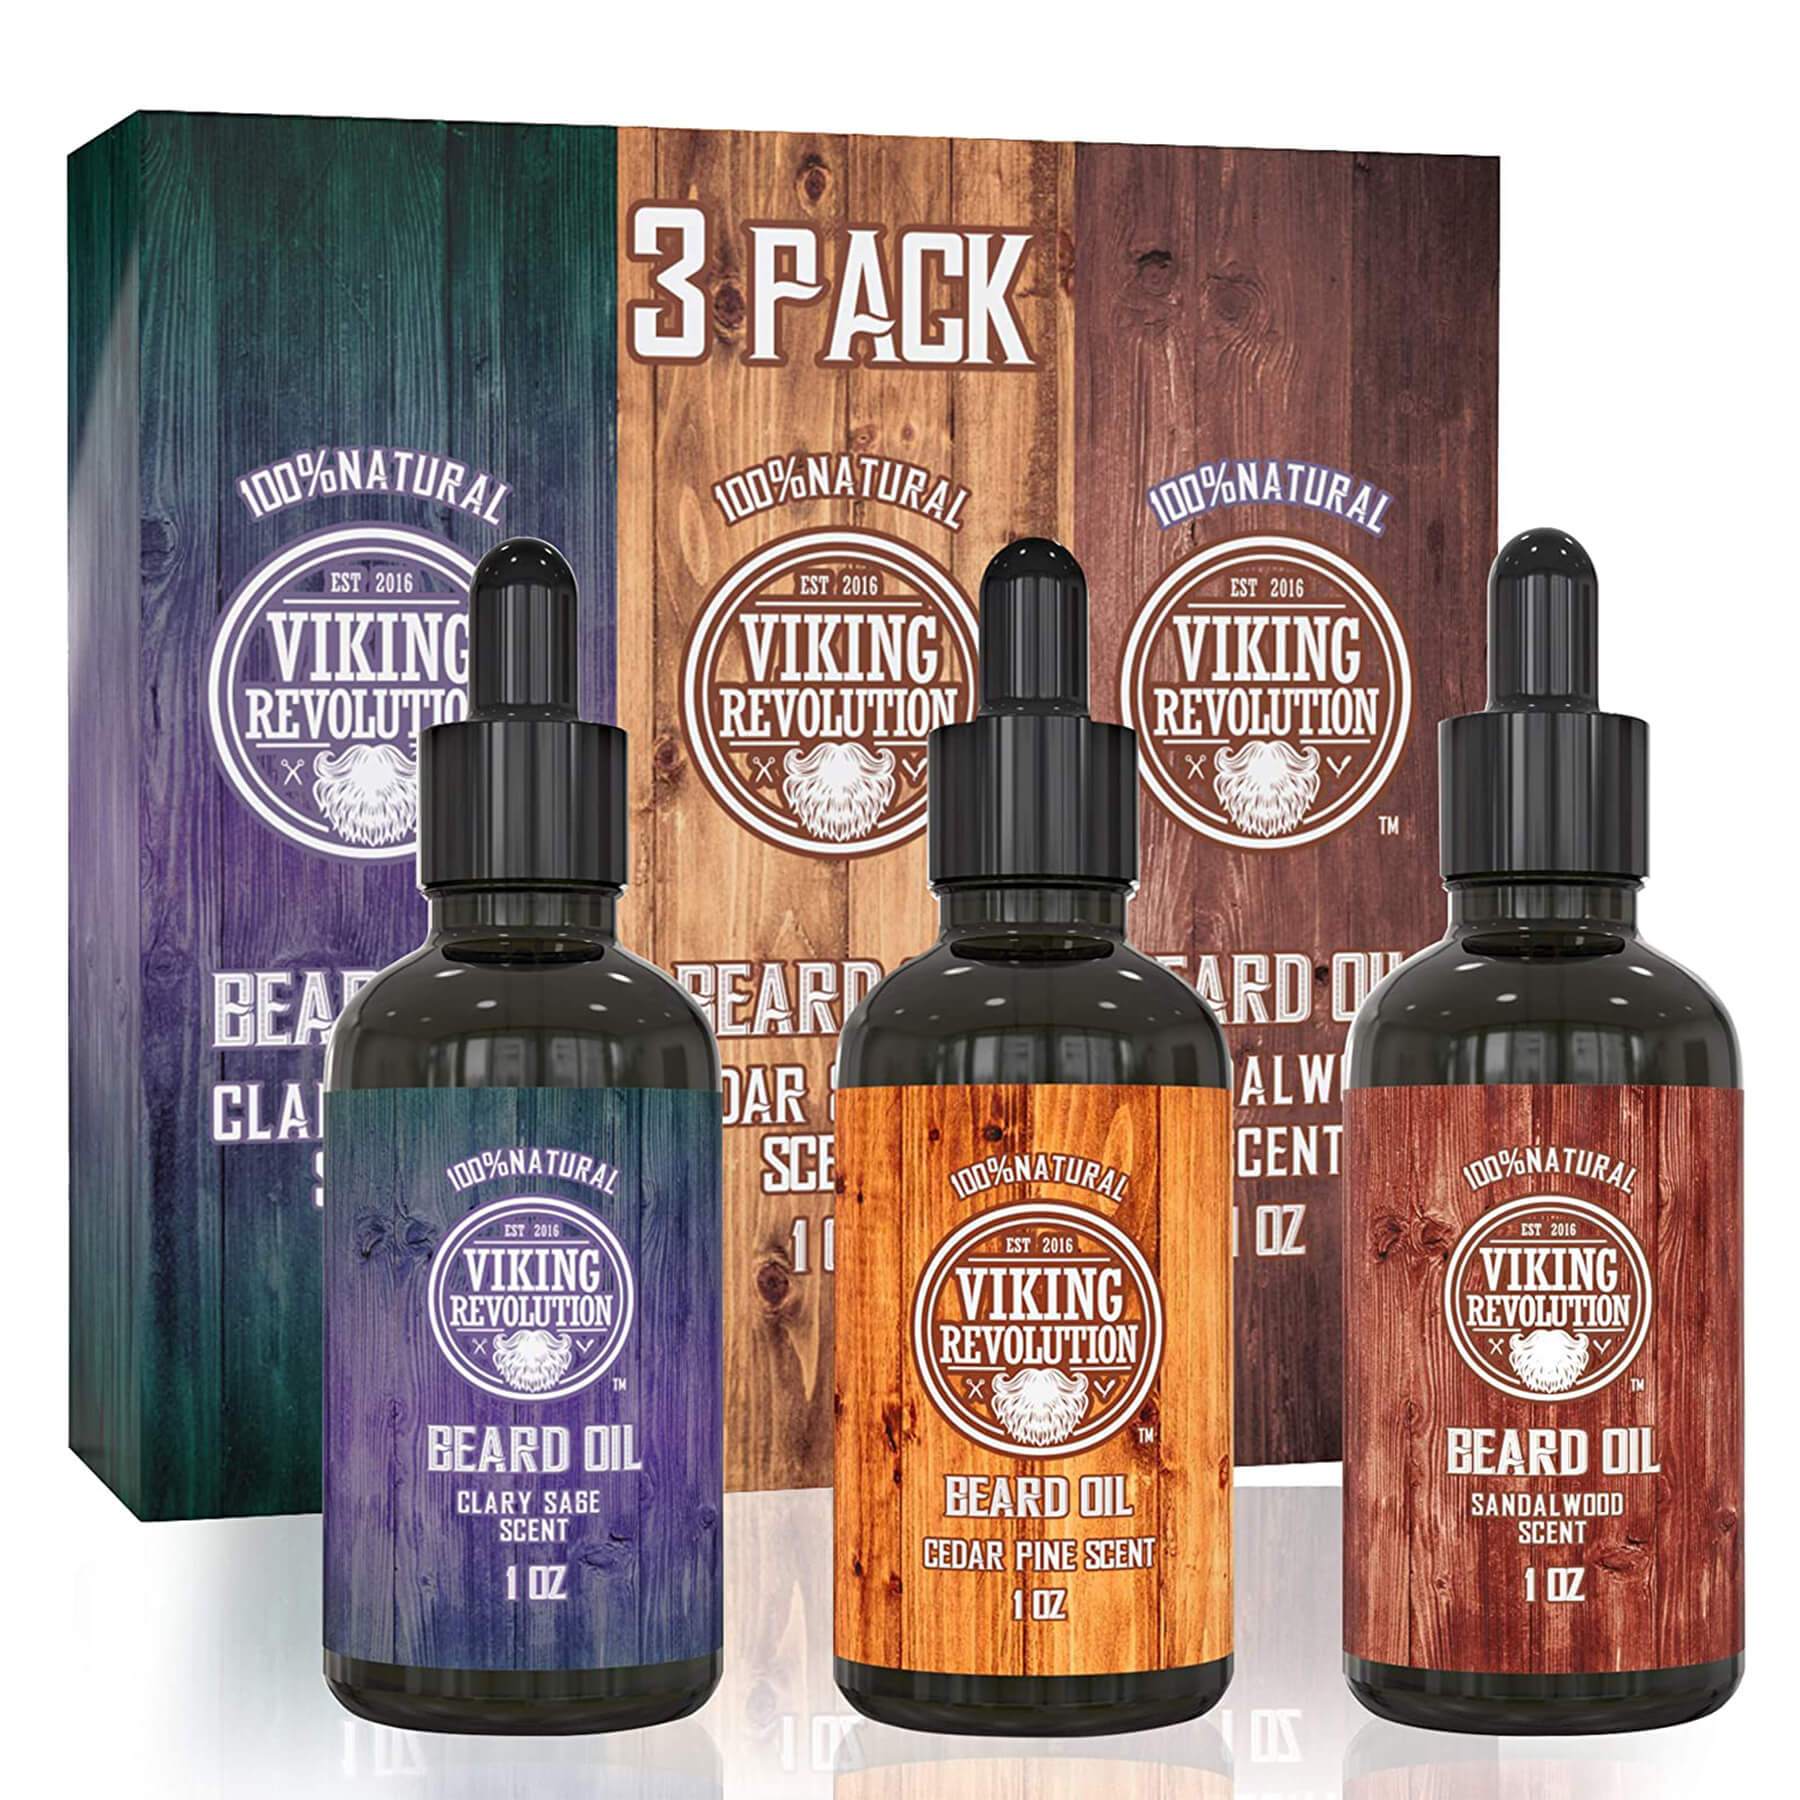 Beard Oil Conditioner 3 Pack (Variety 2 - 3Pack Mix Bay Rum, Unscented, and Sandalwood Oil